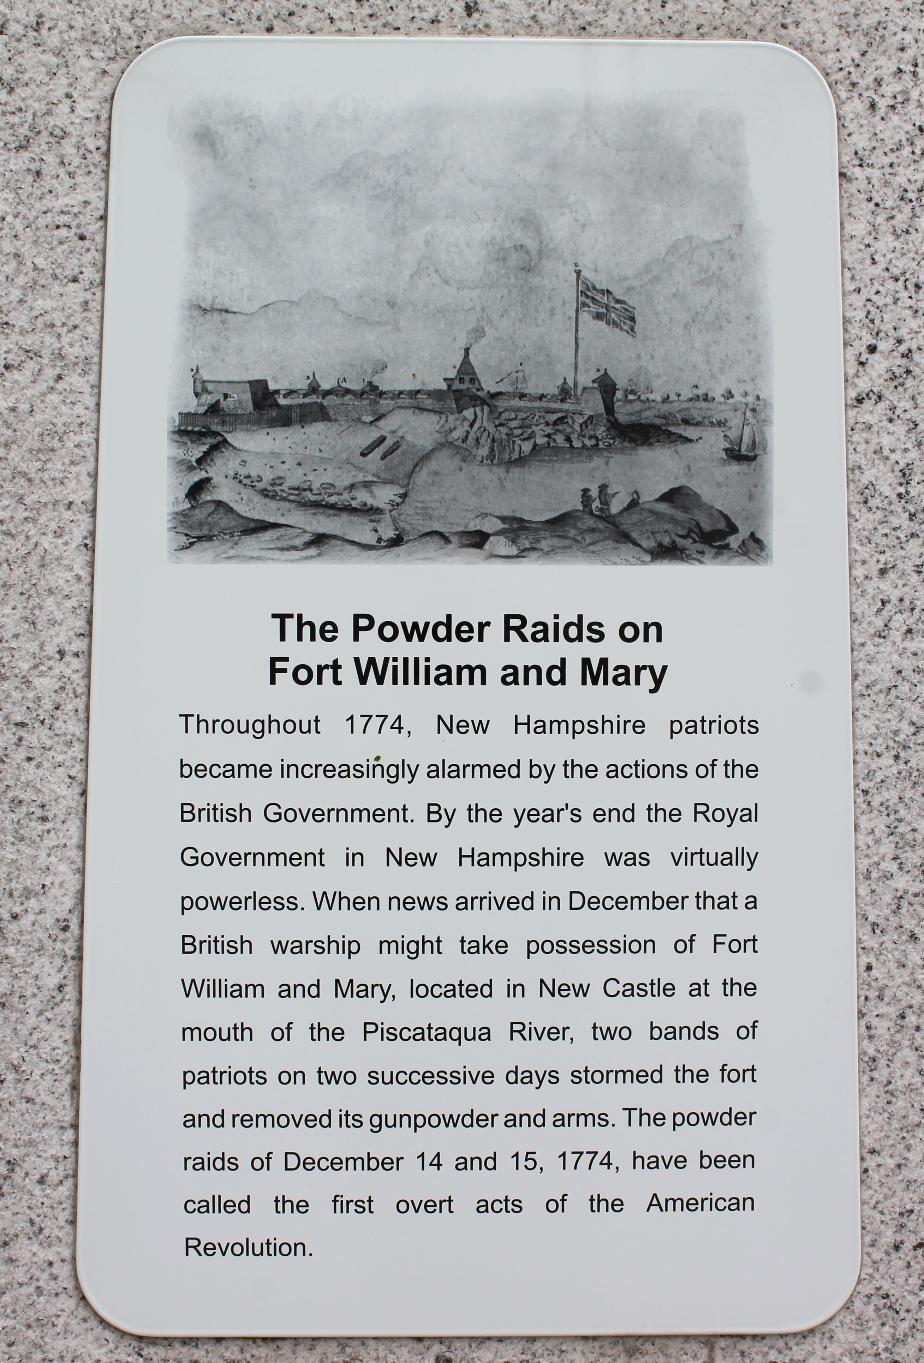 NH State Veterans Cemetery - The Powder Raids on Fort William & Mary